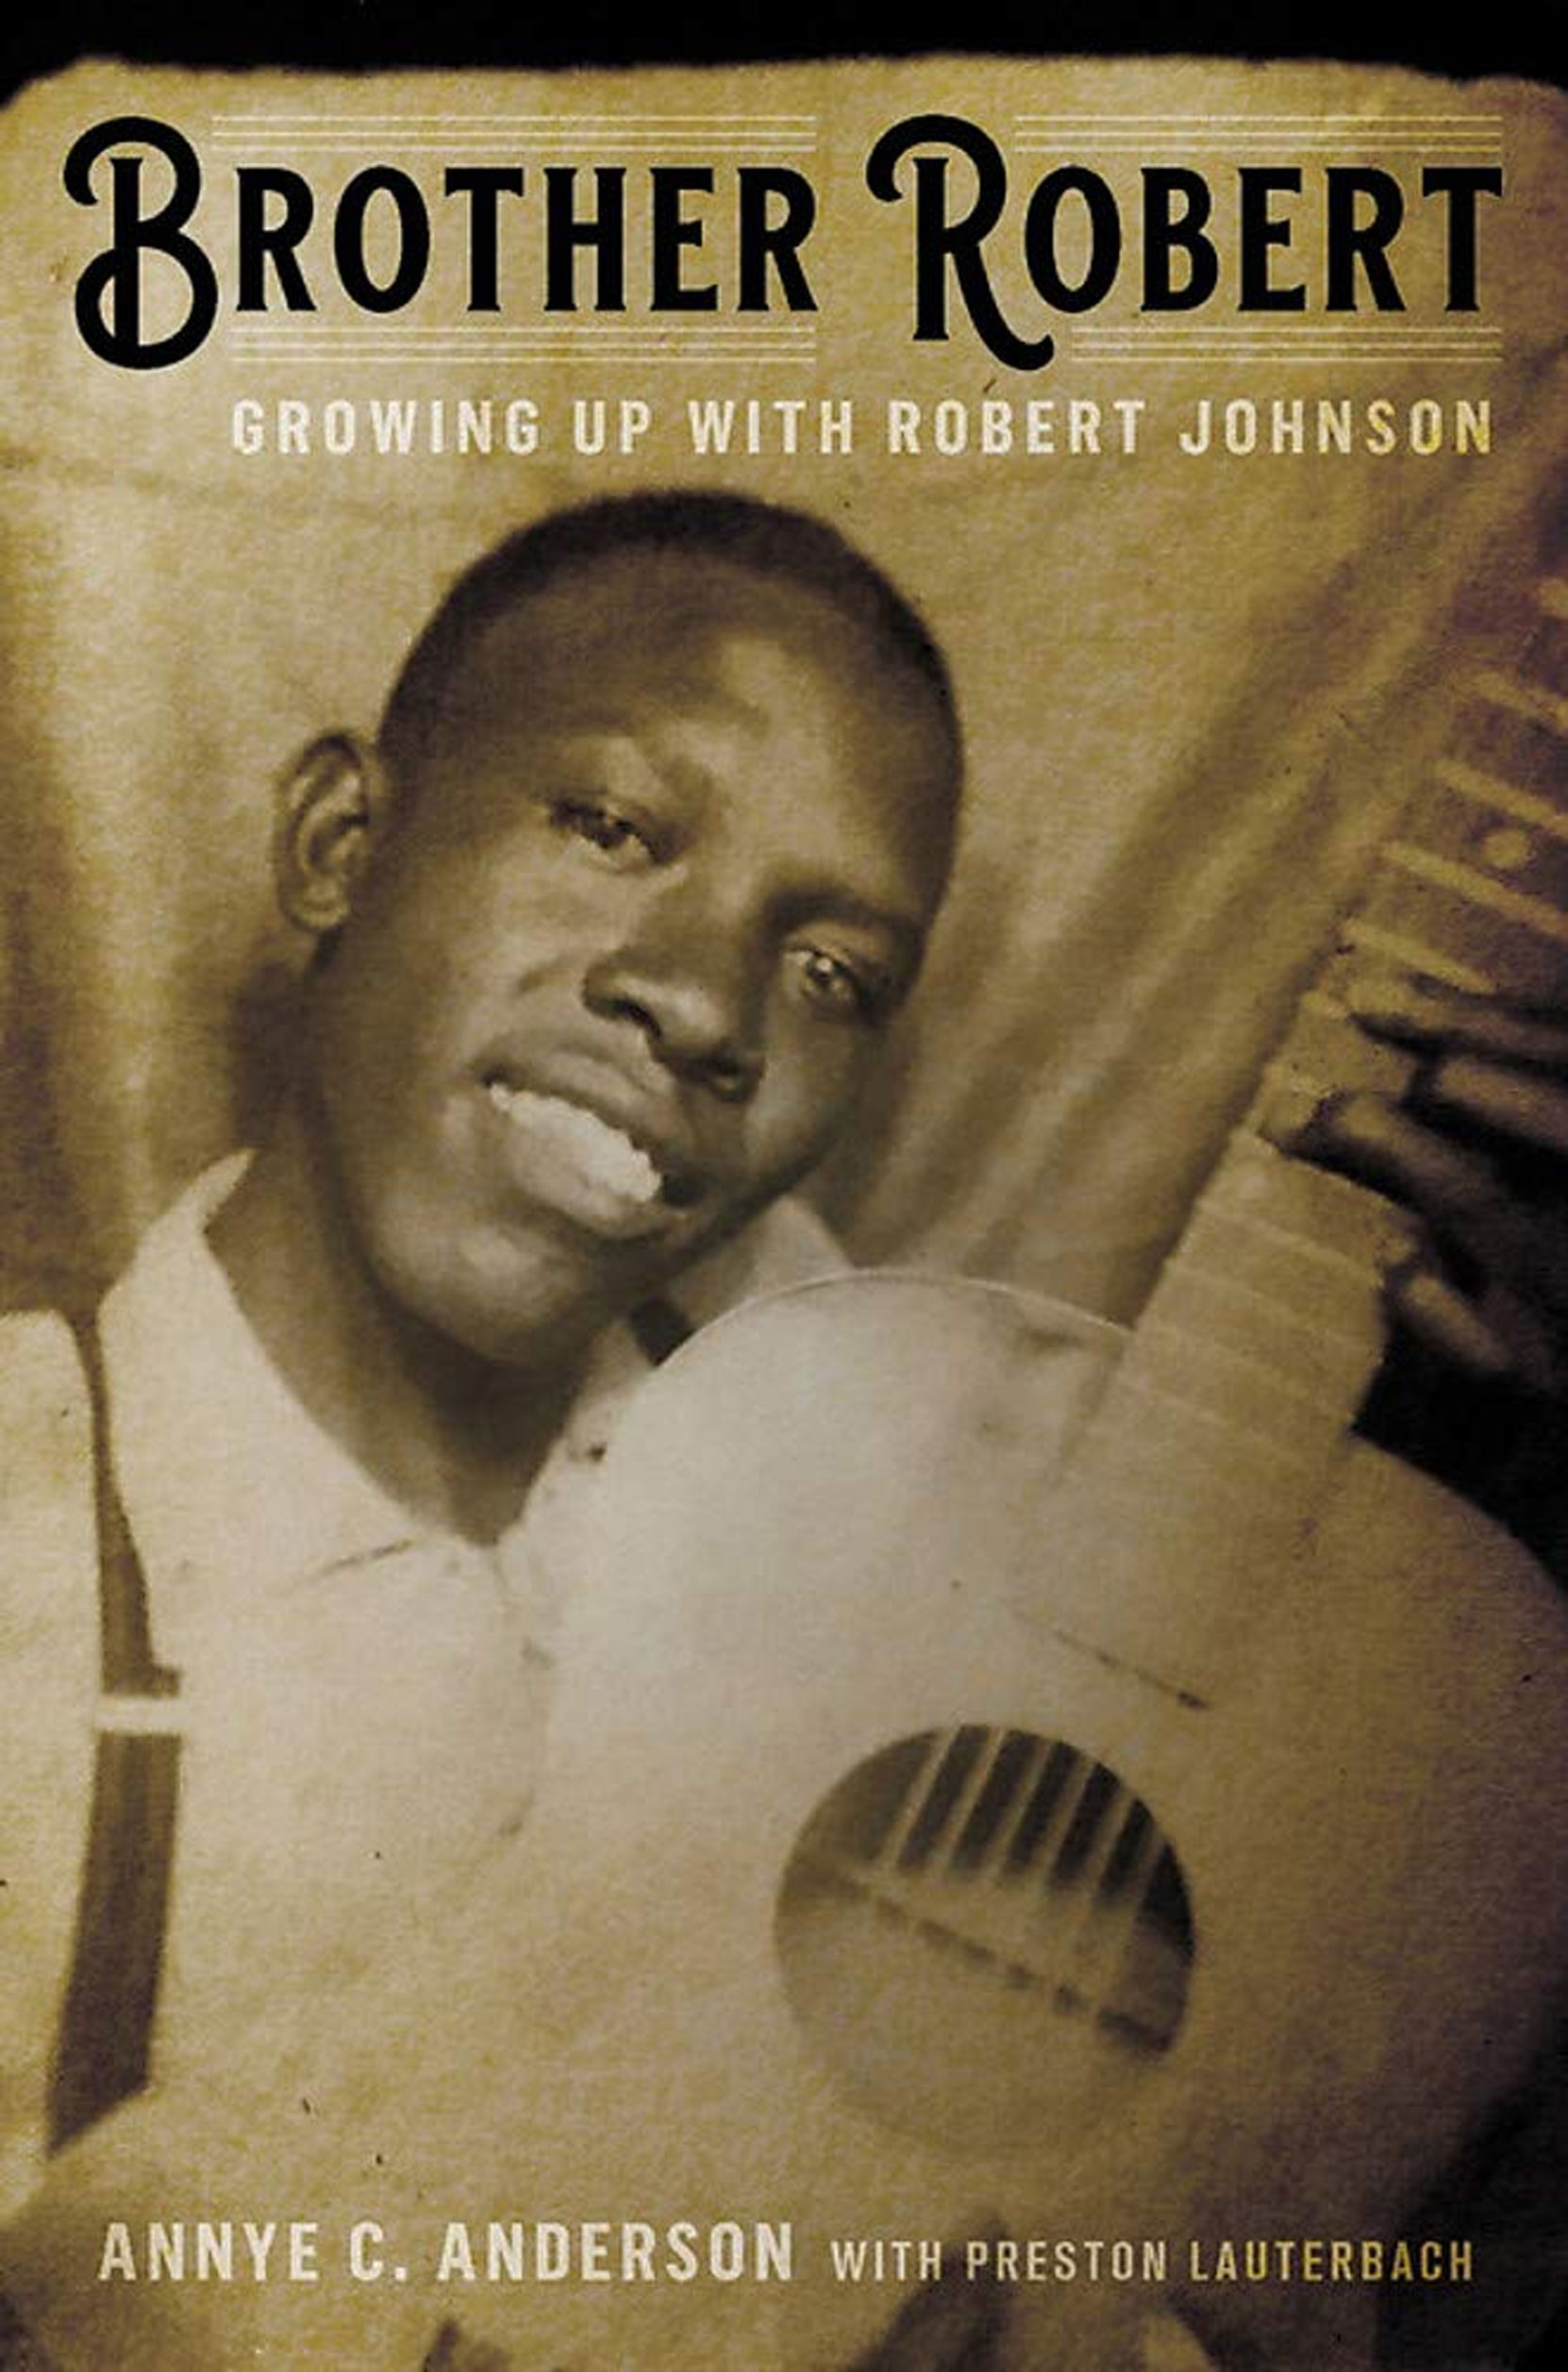 Brother Robert: Growing Up With Robert Johnson, by Annye E. Anderson with Preston Lauderbach, book cover